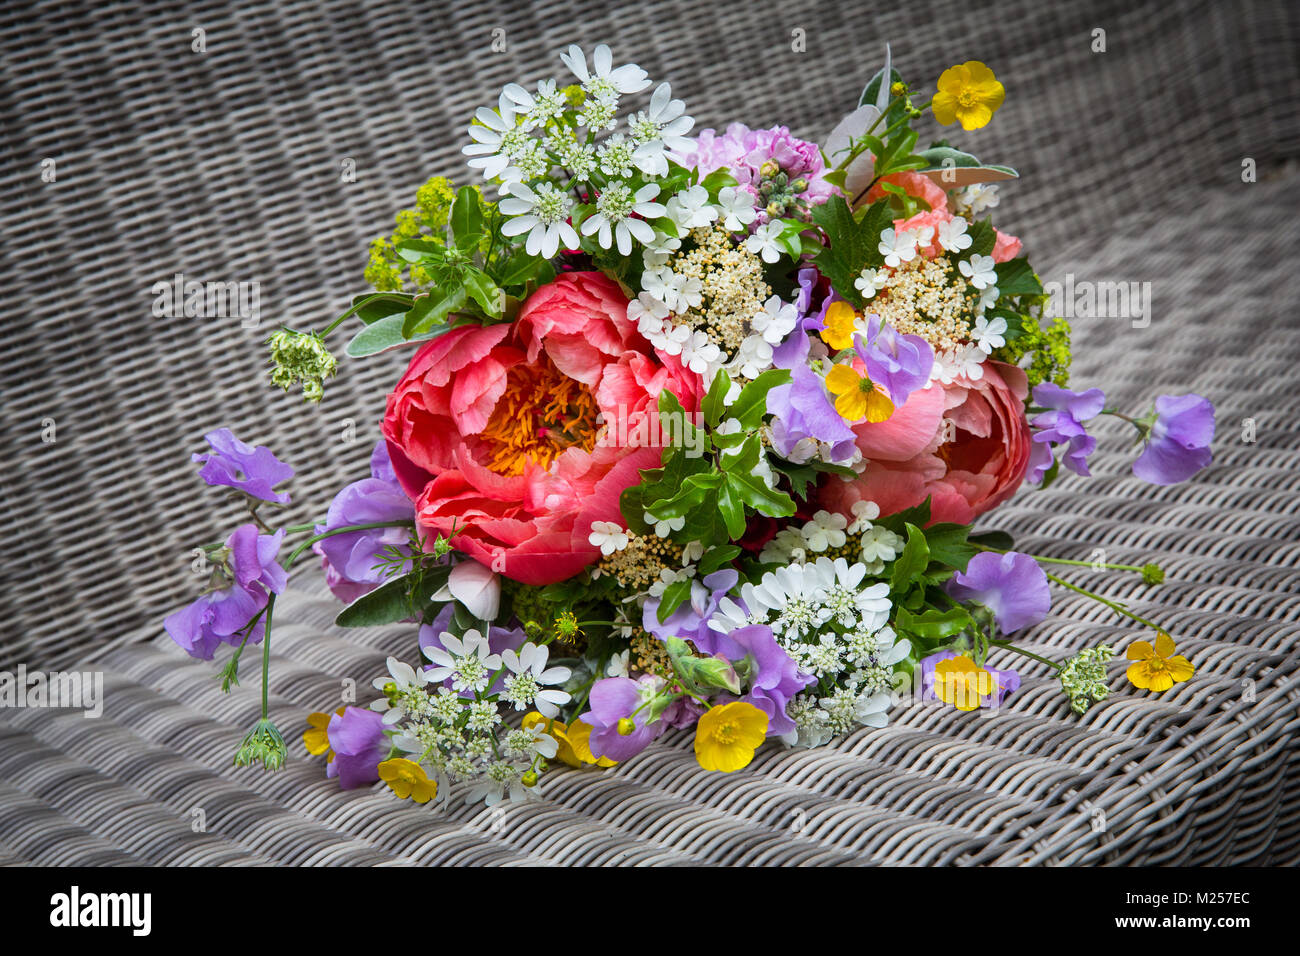 Colourful flower bouquet with peony rose and buttercups on wickerwork Stock Photo